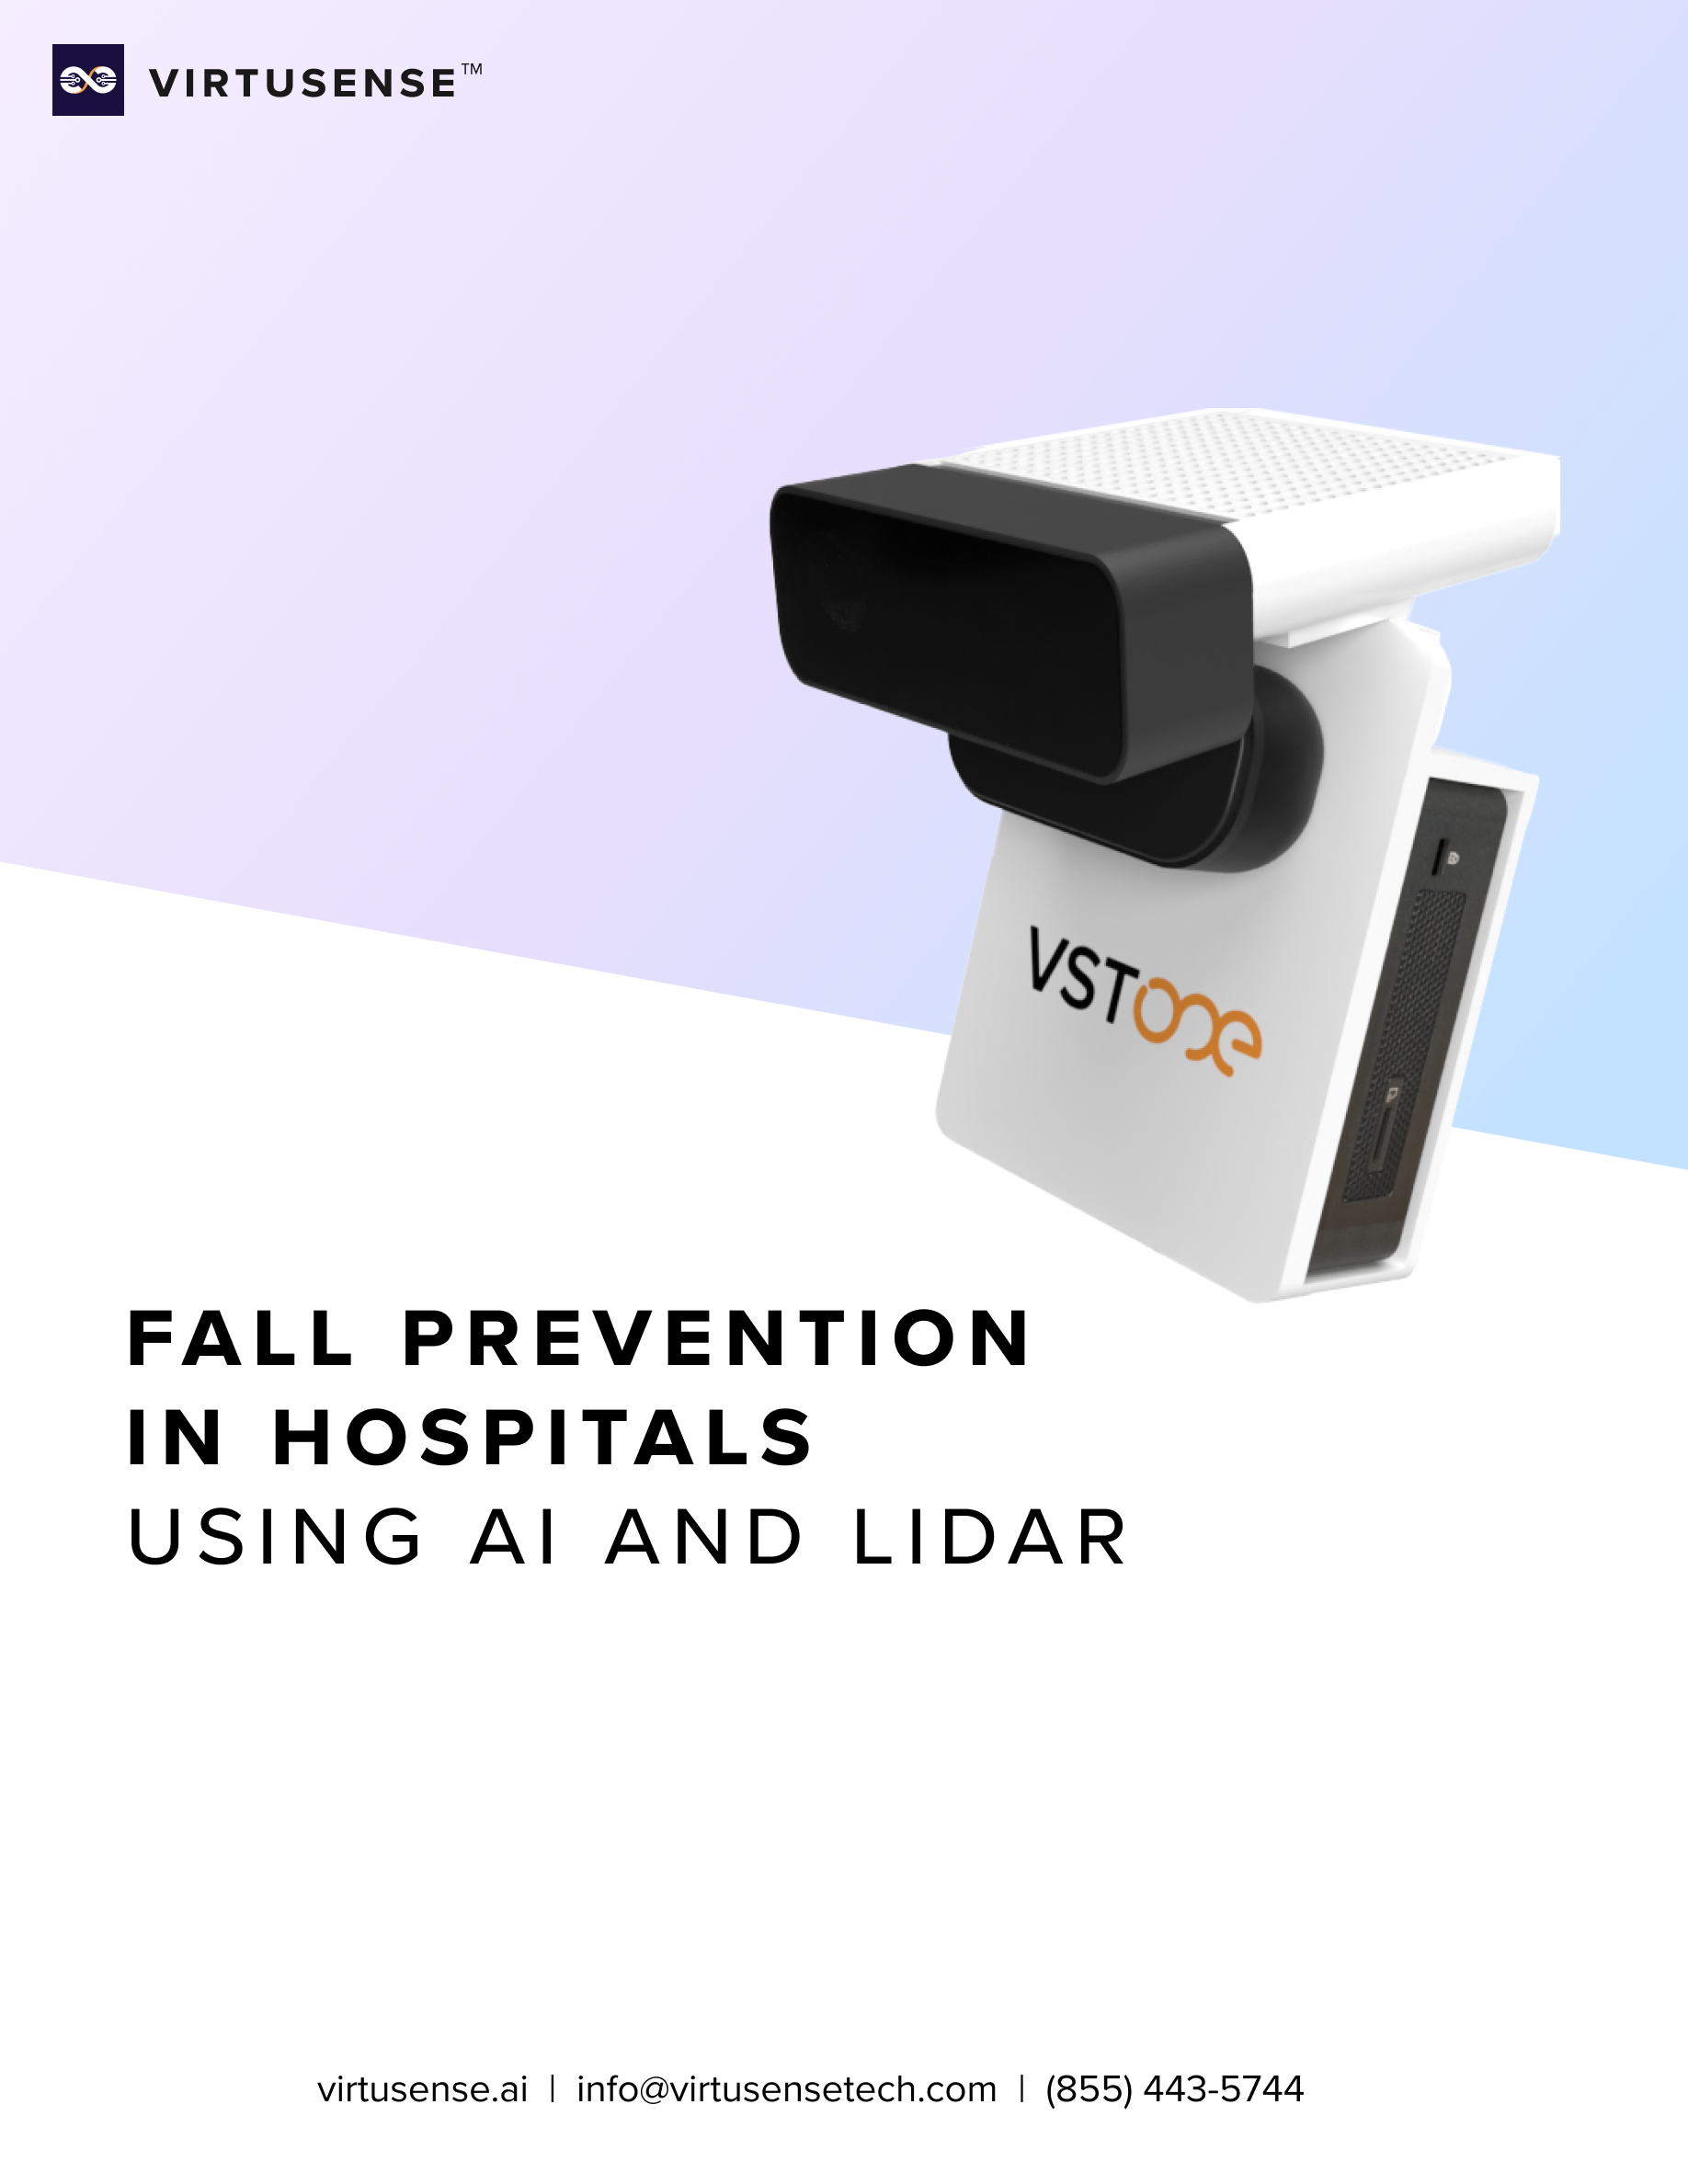 Fall Prevention in Hospitals Using AI and Lidar-Website